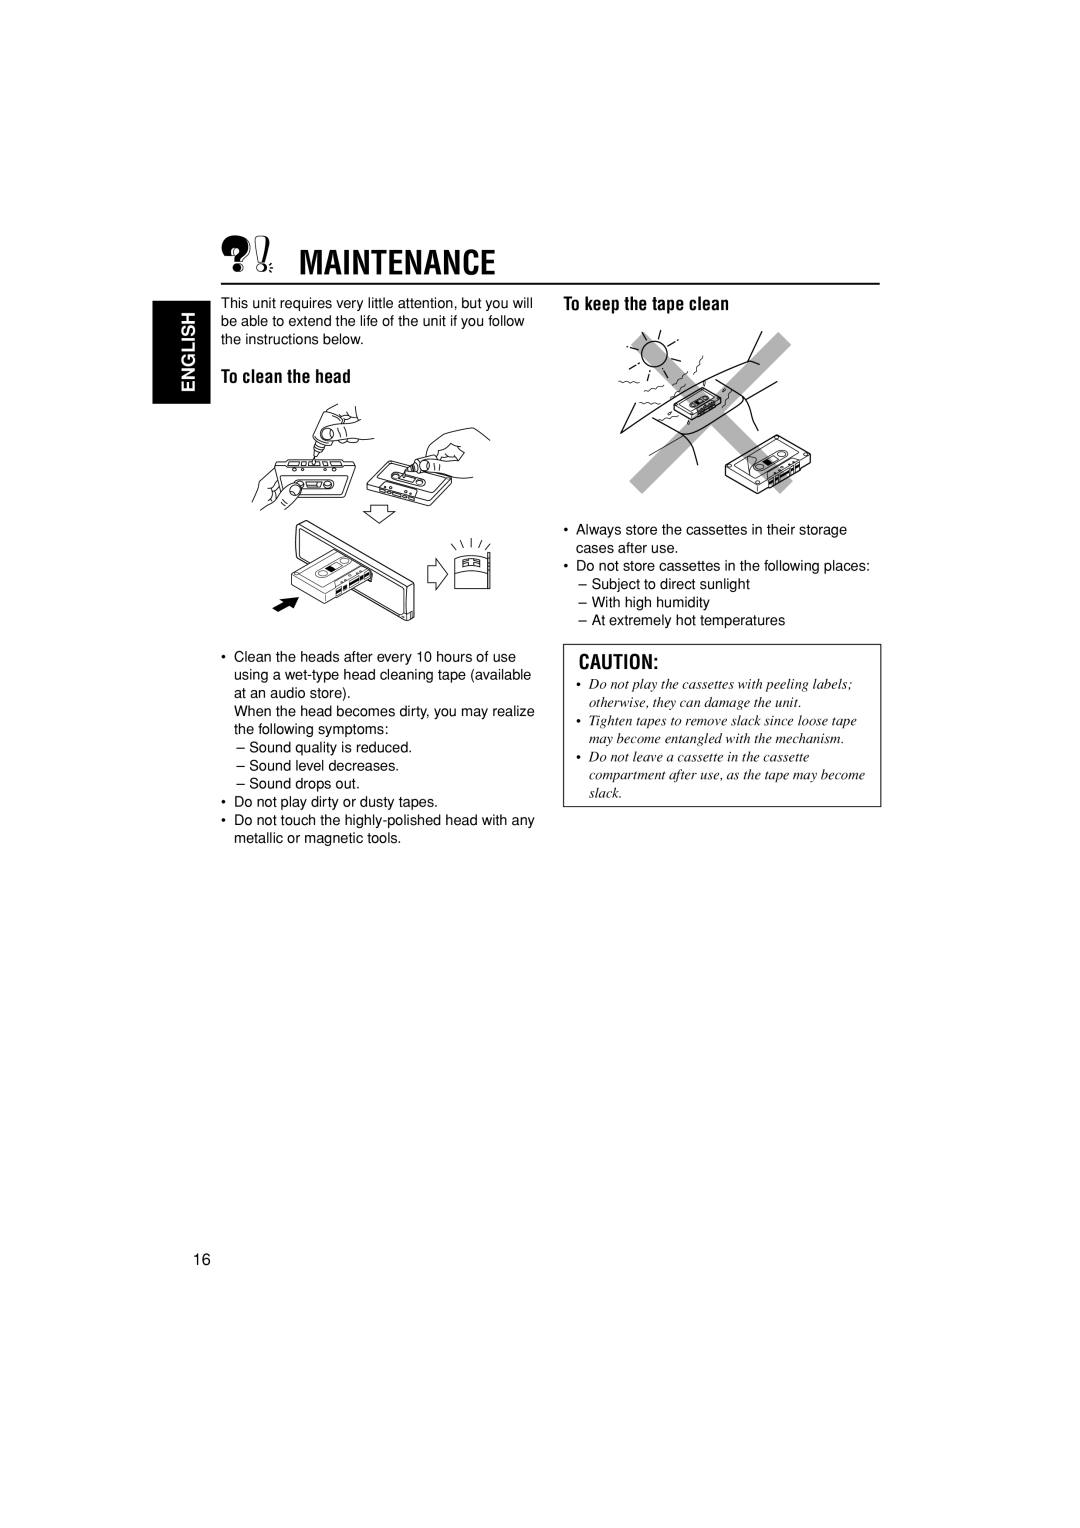 JVC KS-FX385 manual Maintenance, English, To clean the head, To keep the tape clean 